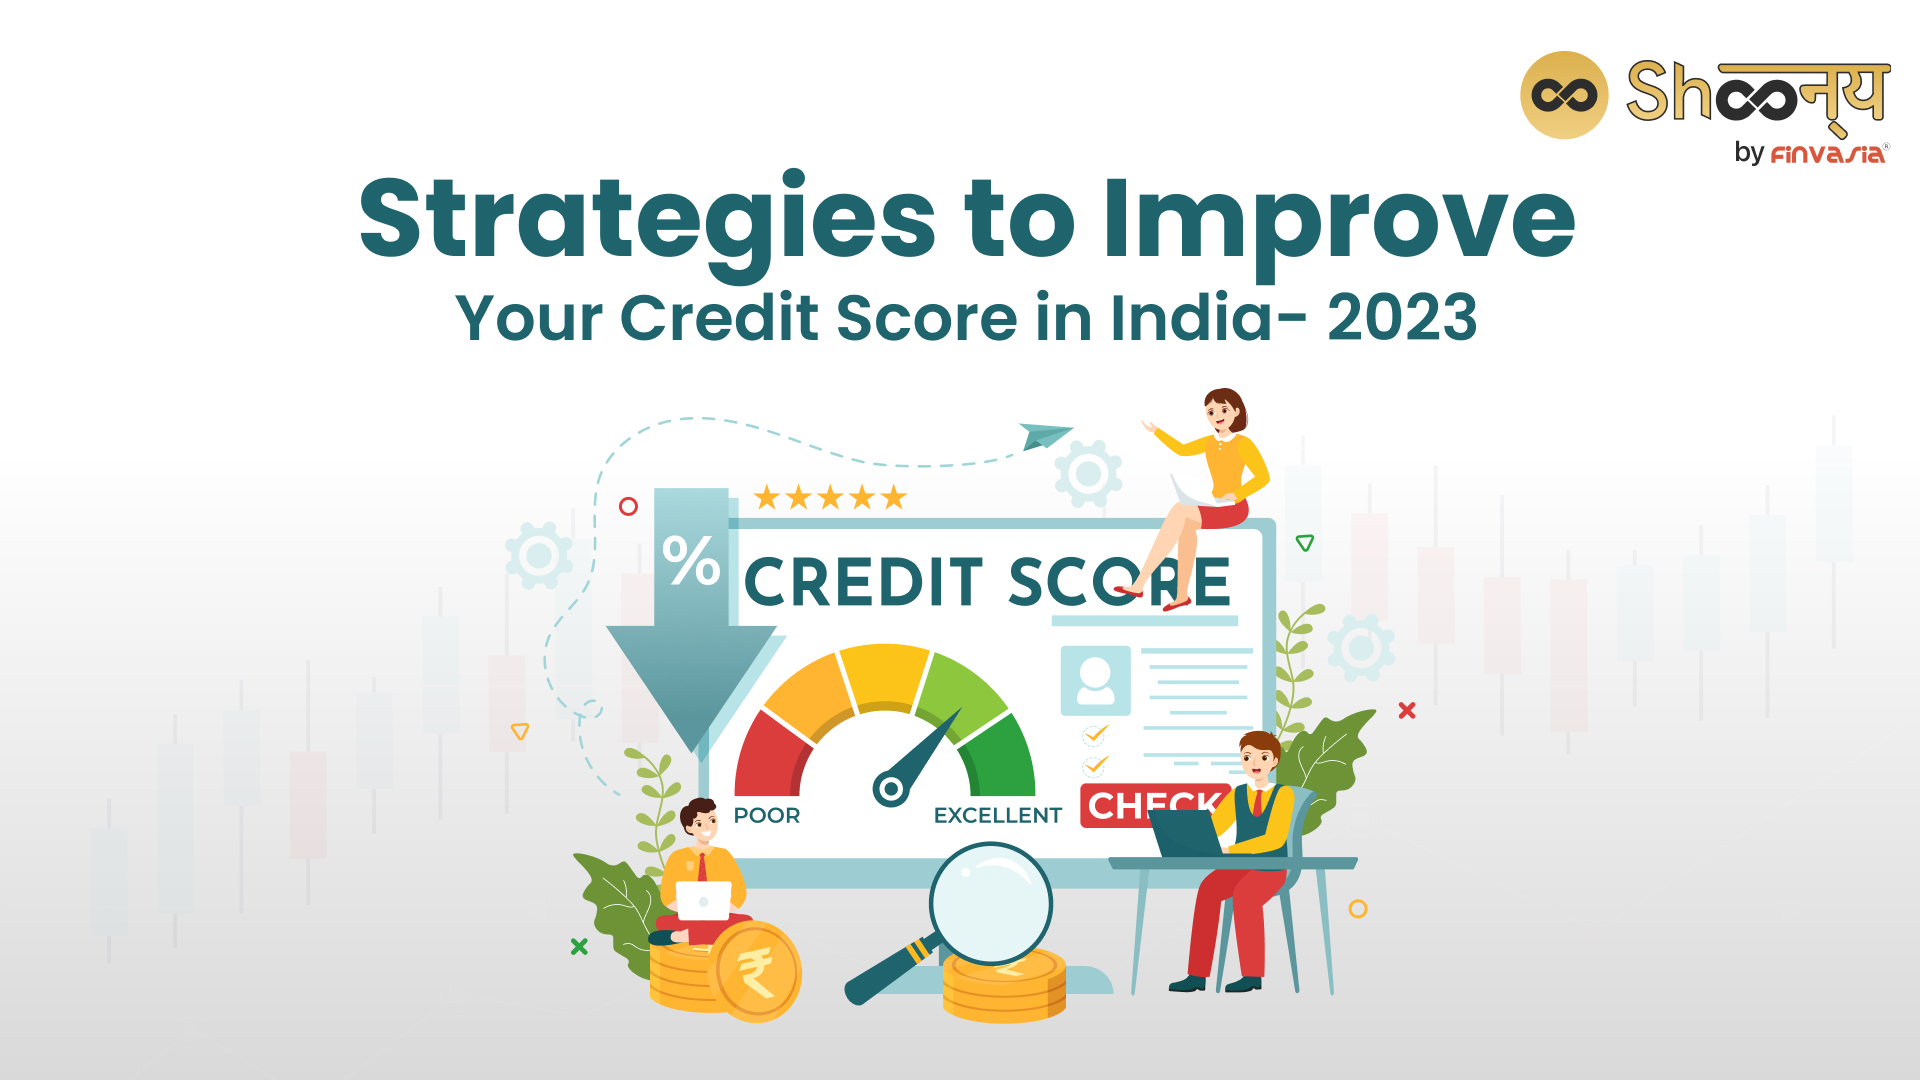 Strategies-to-Improve-Your-Credit-Score-in-India-2023.jpg